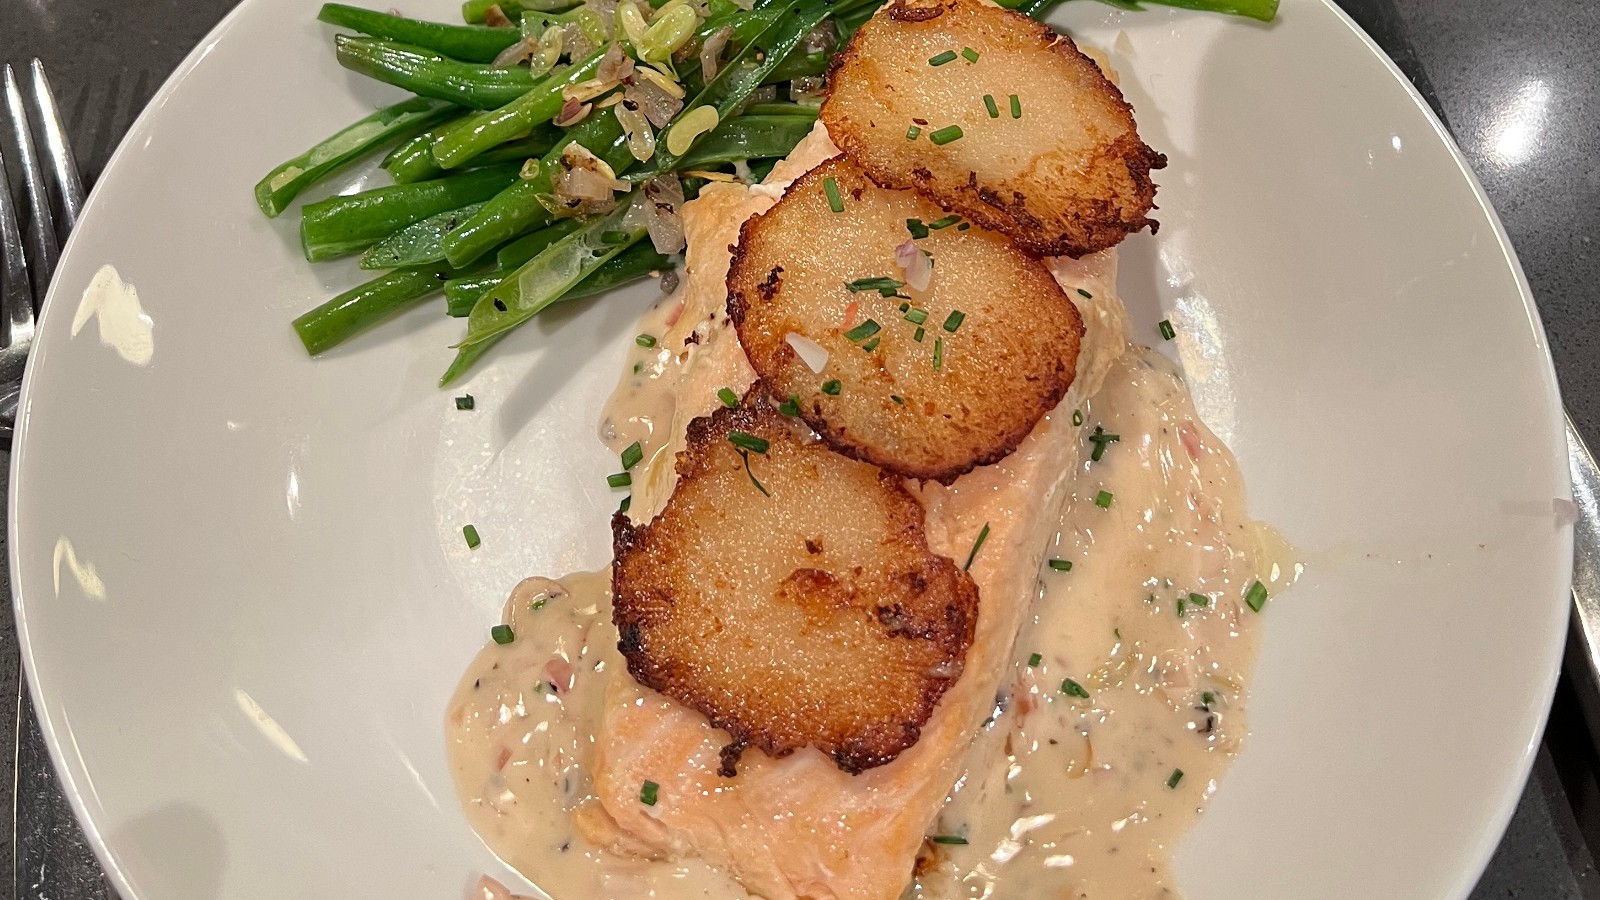 Image of Potato-Crusted King Salmon, White Wine Butter Sauce, and Green Beans from Whisk Cooking Class